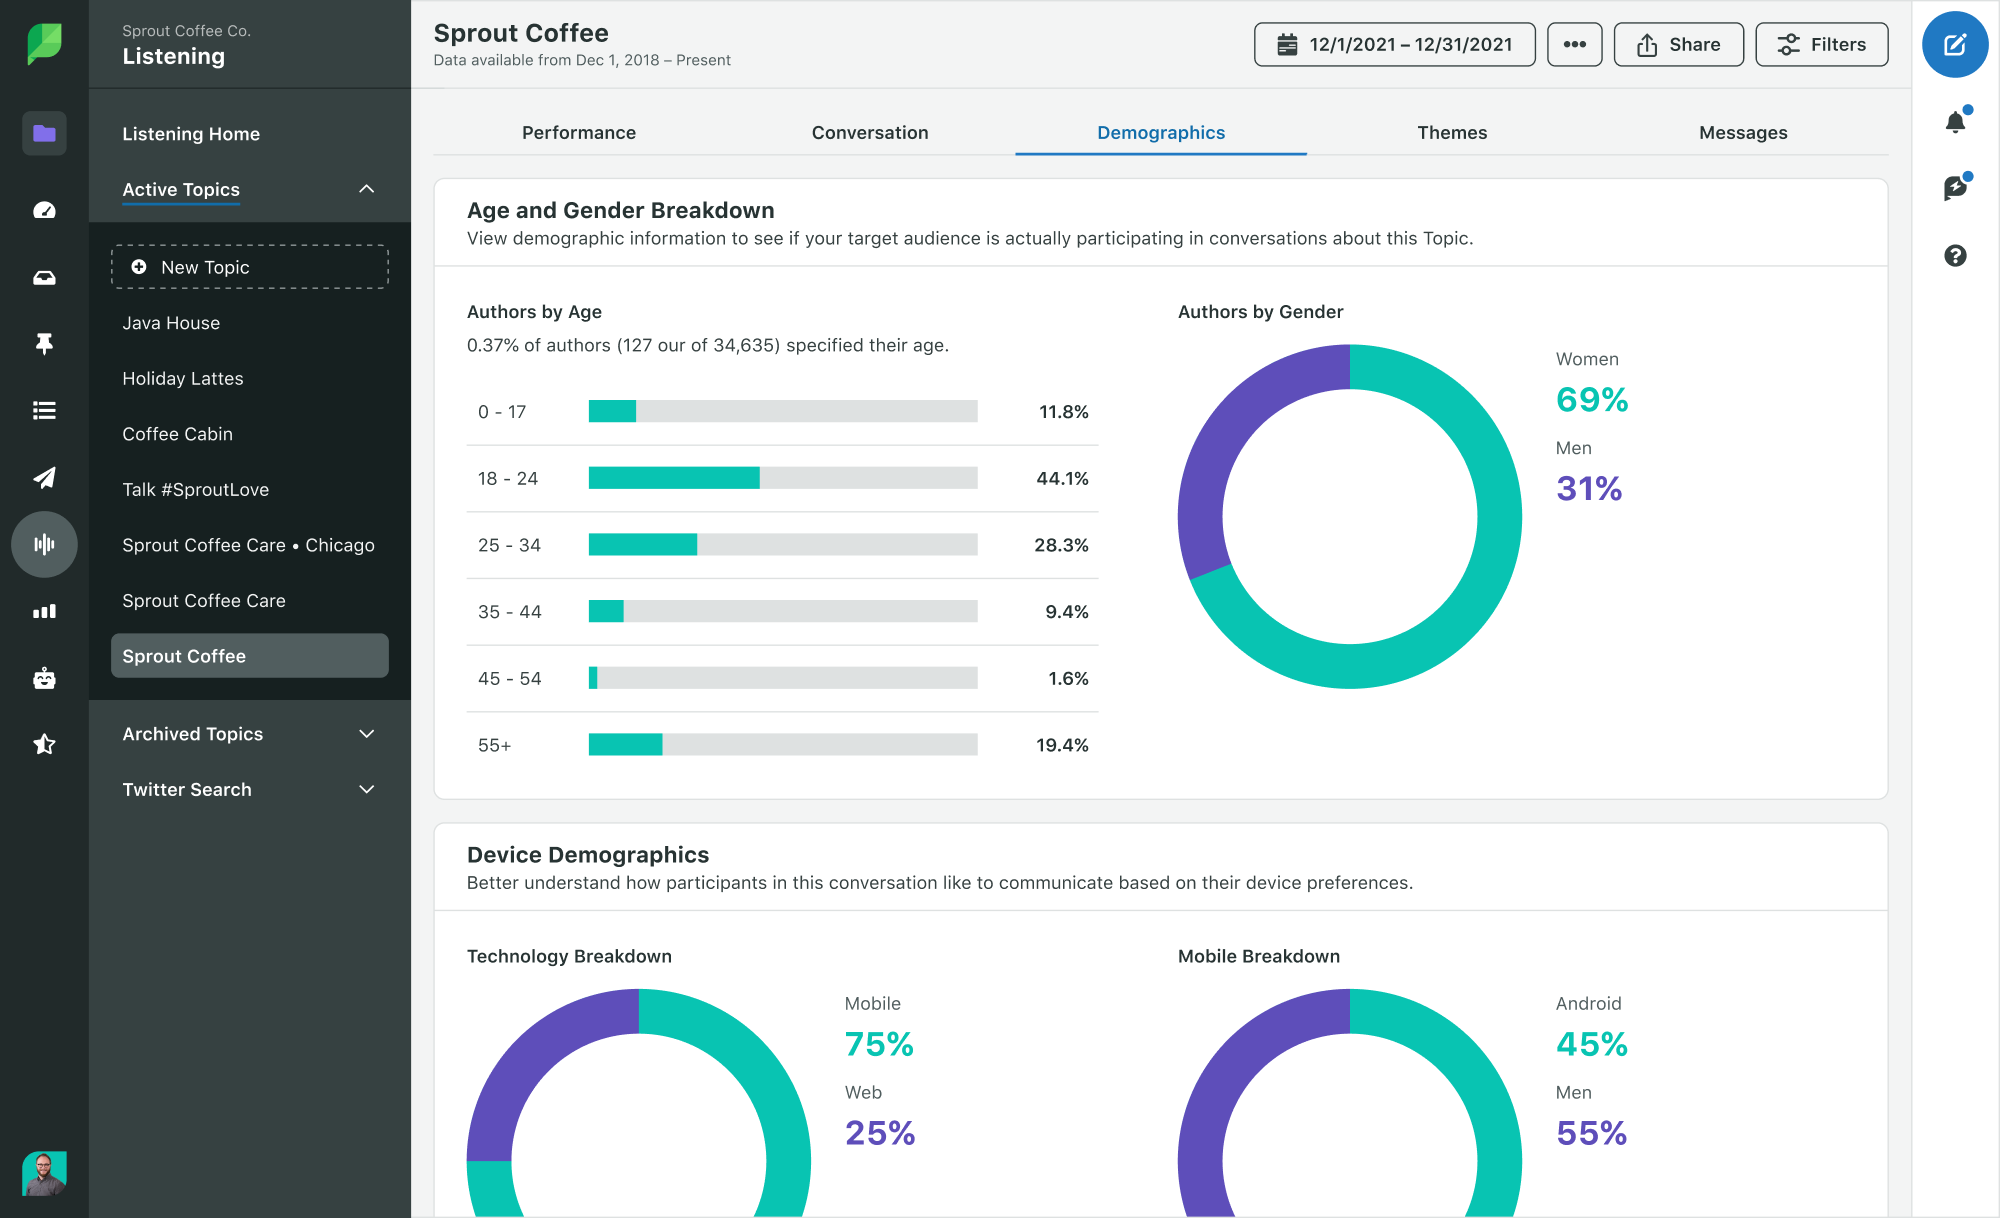 Sprout Social Product Image of Listening Demographics with Age Gender and Device